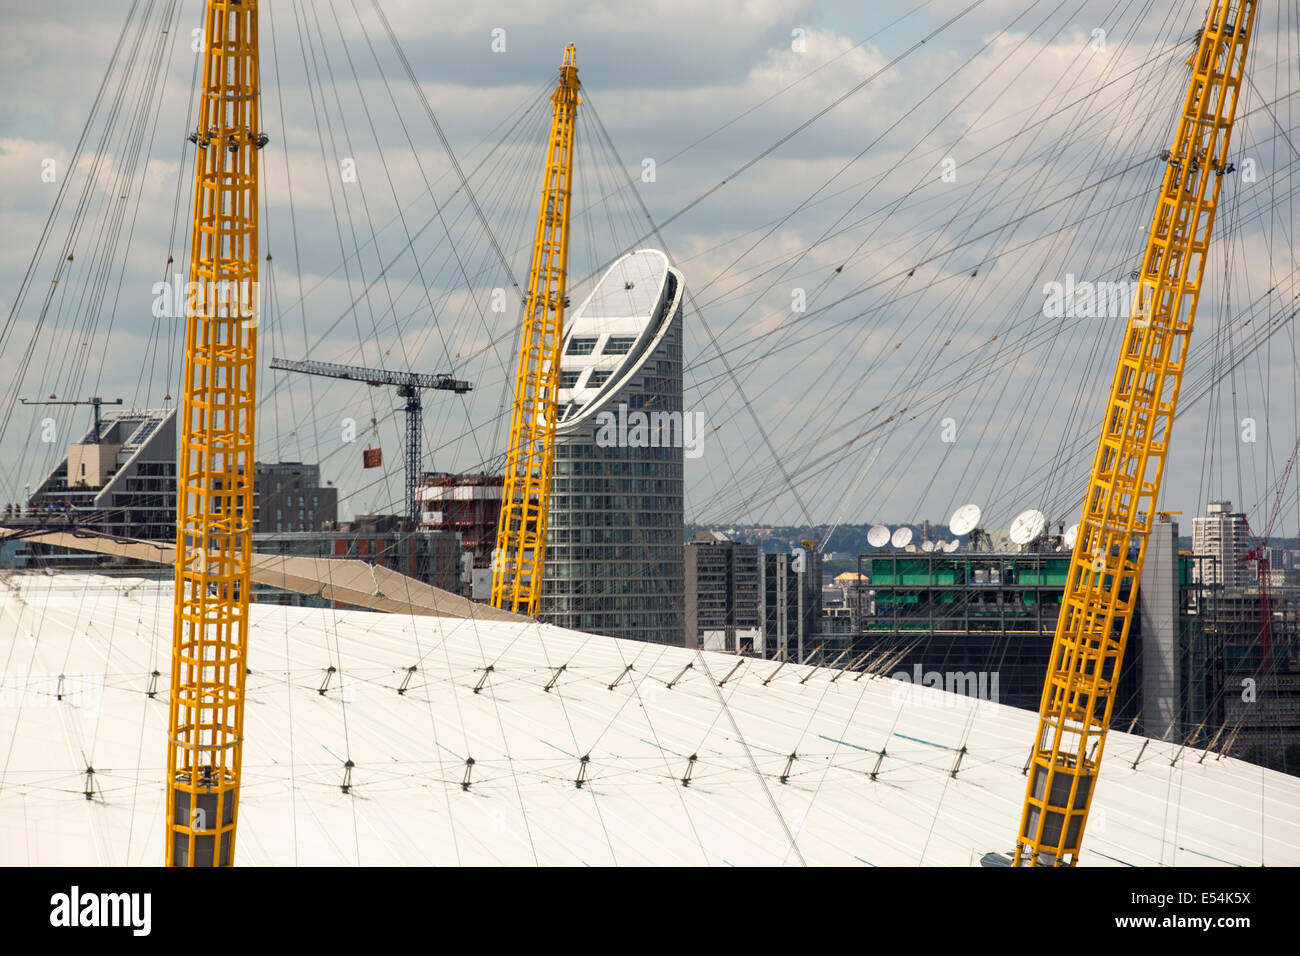 The O2 Arena on the River Thames in london, UK, it was formally the Millenium Dome. Stock Photo